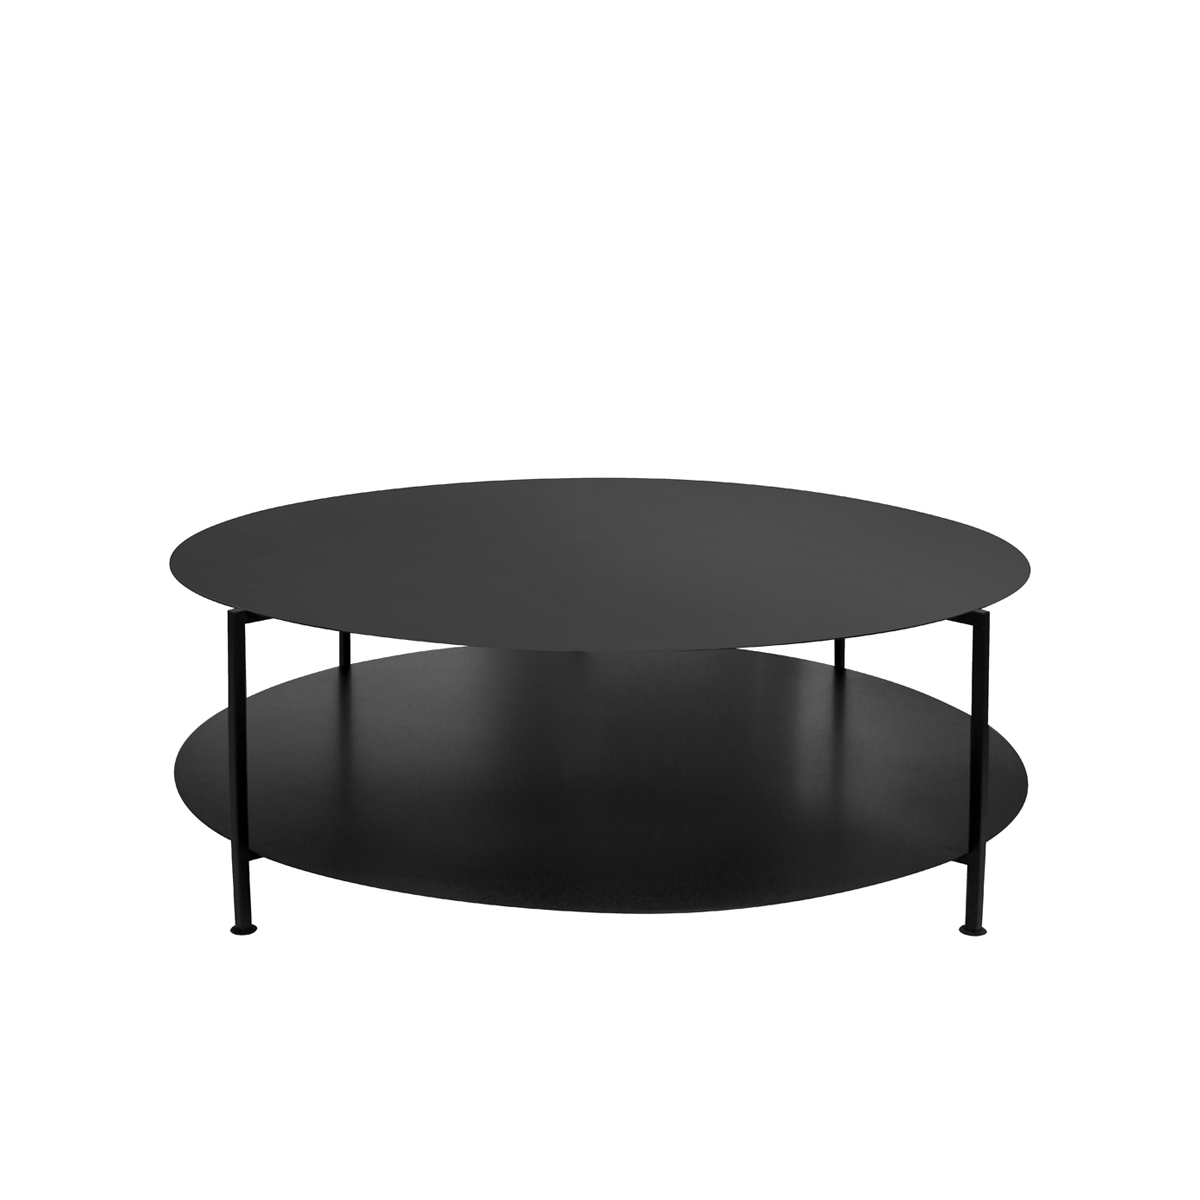 Round Steel Coffee Table With Shelf, Round Black Steel Coffee Table